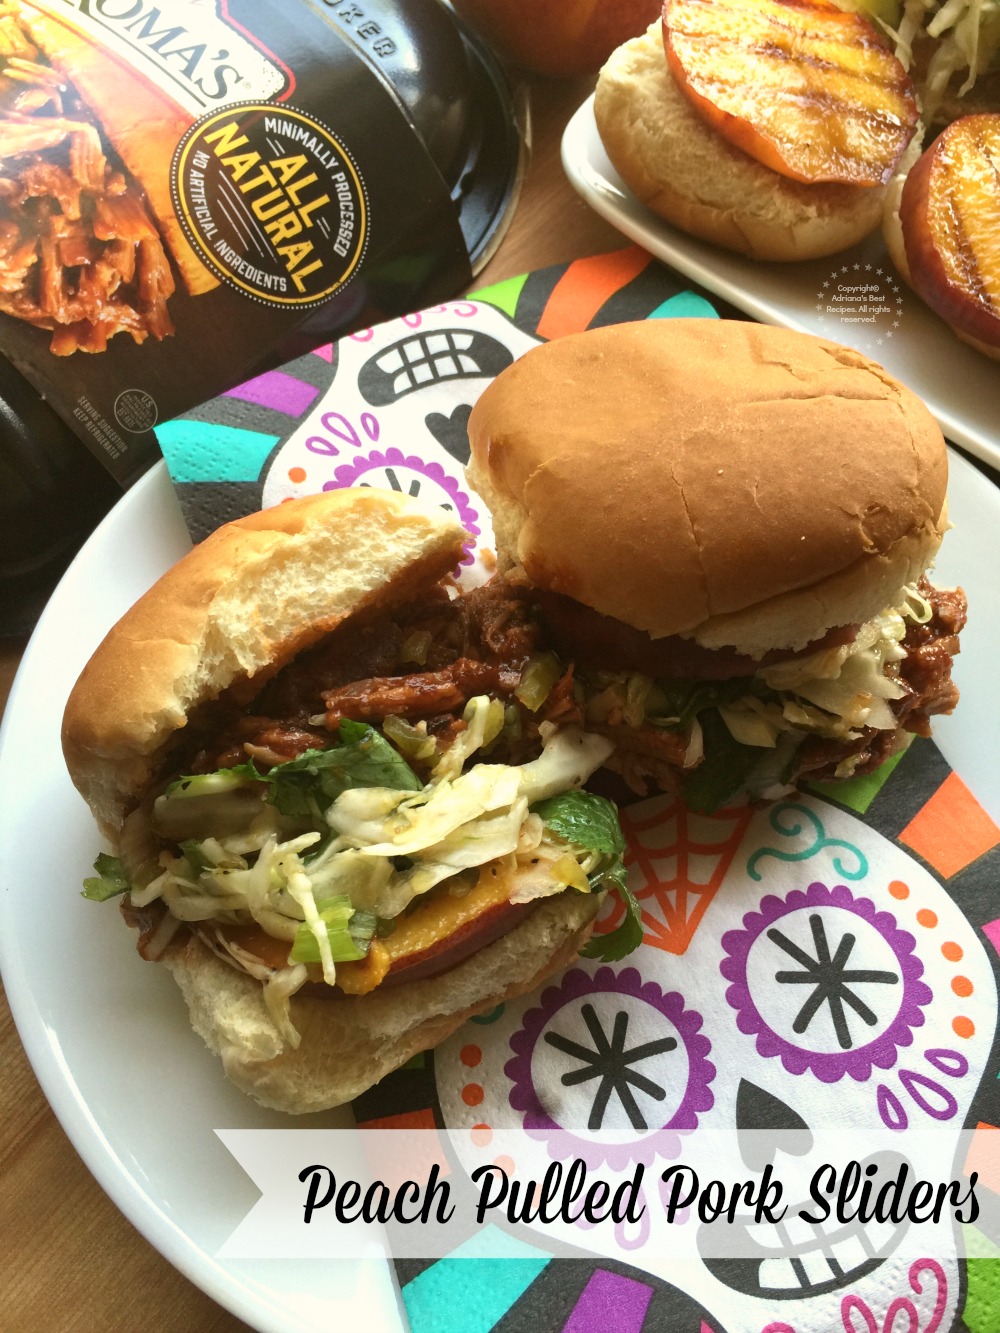 Juicy and tender Peach Pulled Pork Sliders made with seasonal fresh peaches, a citrus spicy slaw and Tony Romas Tender Juicy Pulled Pork Kansas City Sweet Hickory